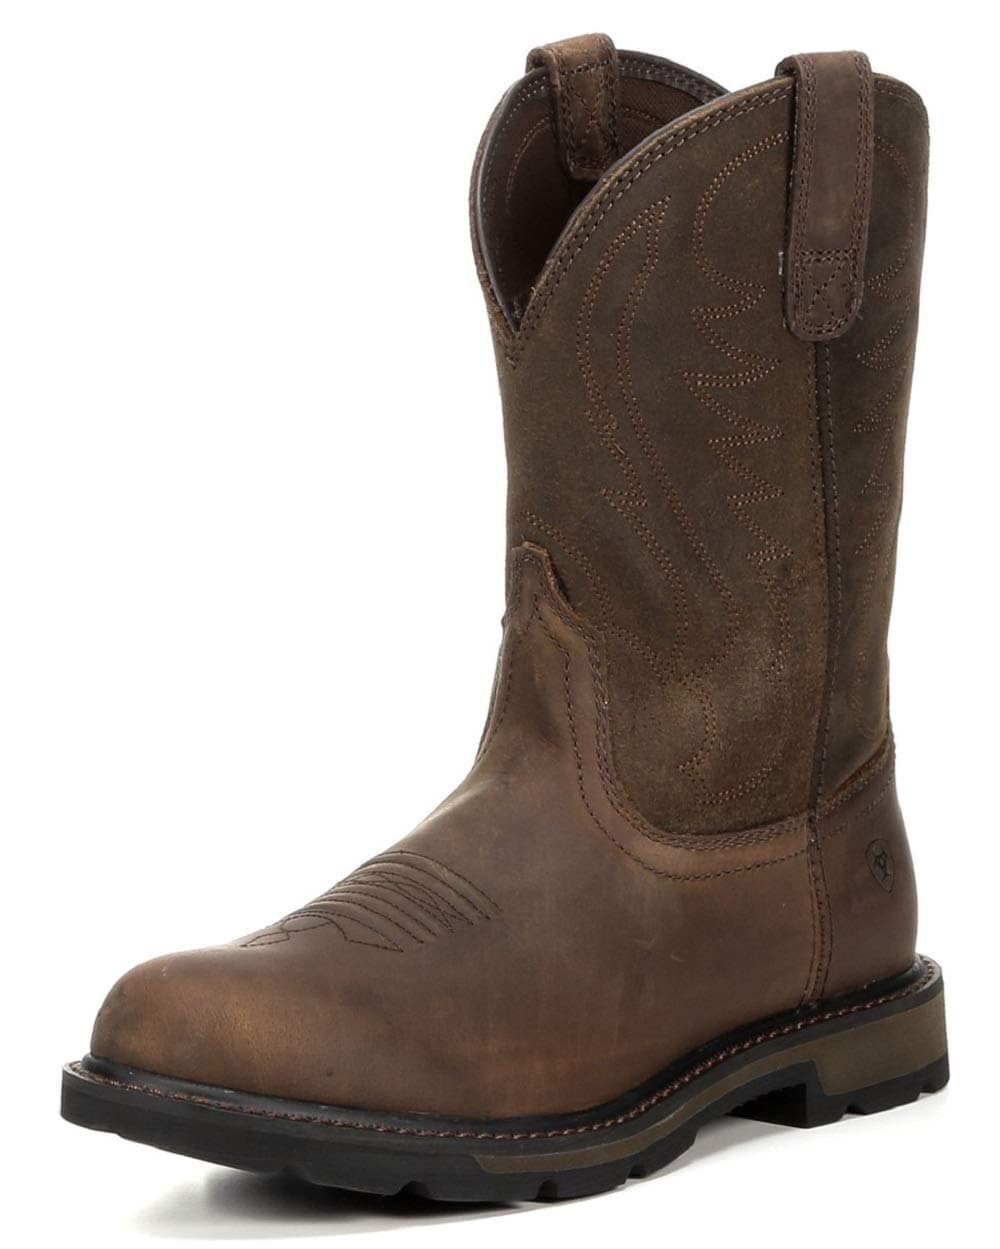 ARIAT Men's Workhog Wide Square Toe Work Boot Review